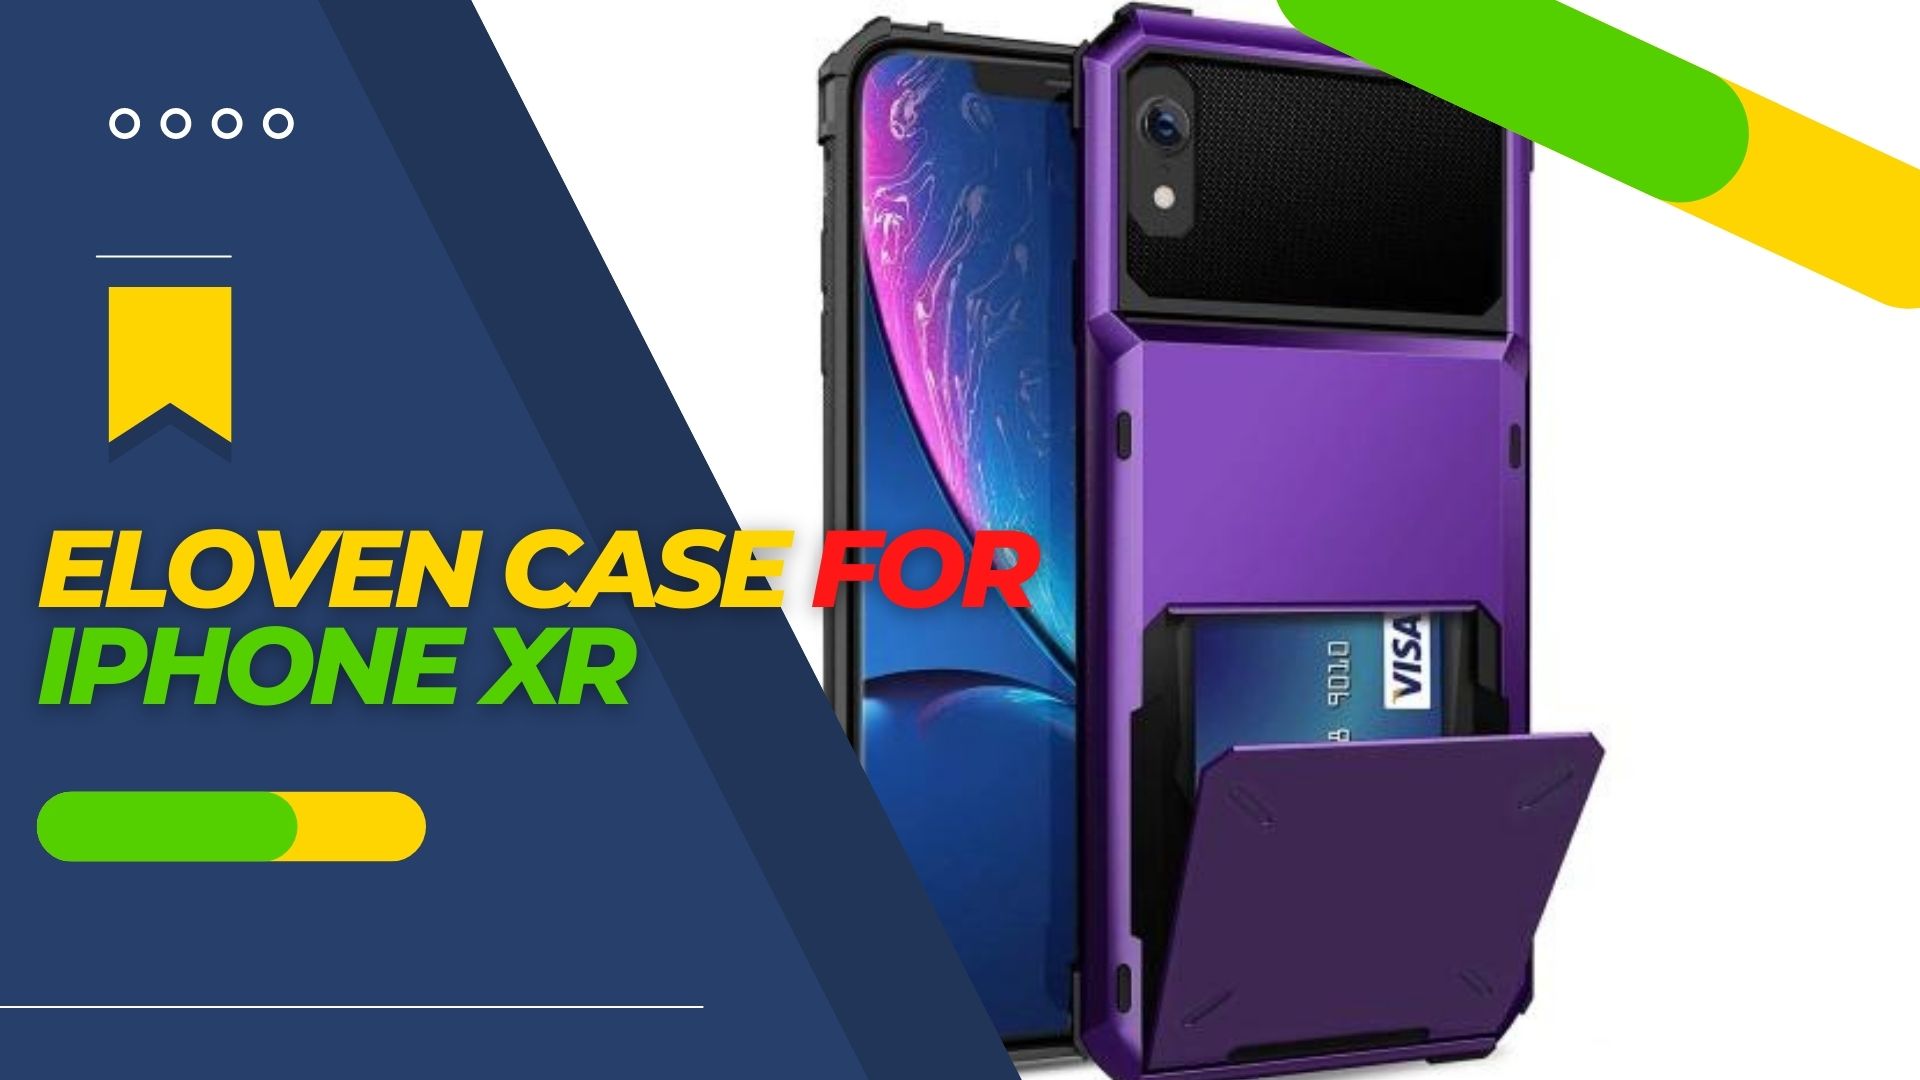 Eloven-Case-for-iPhone-XR